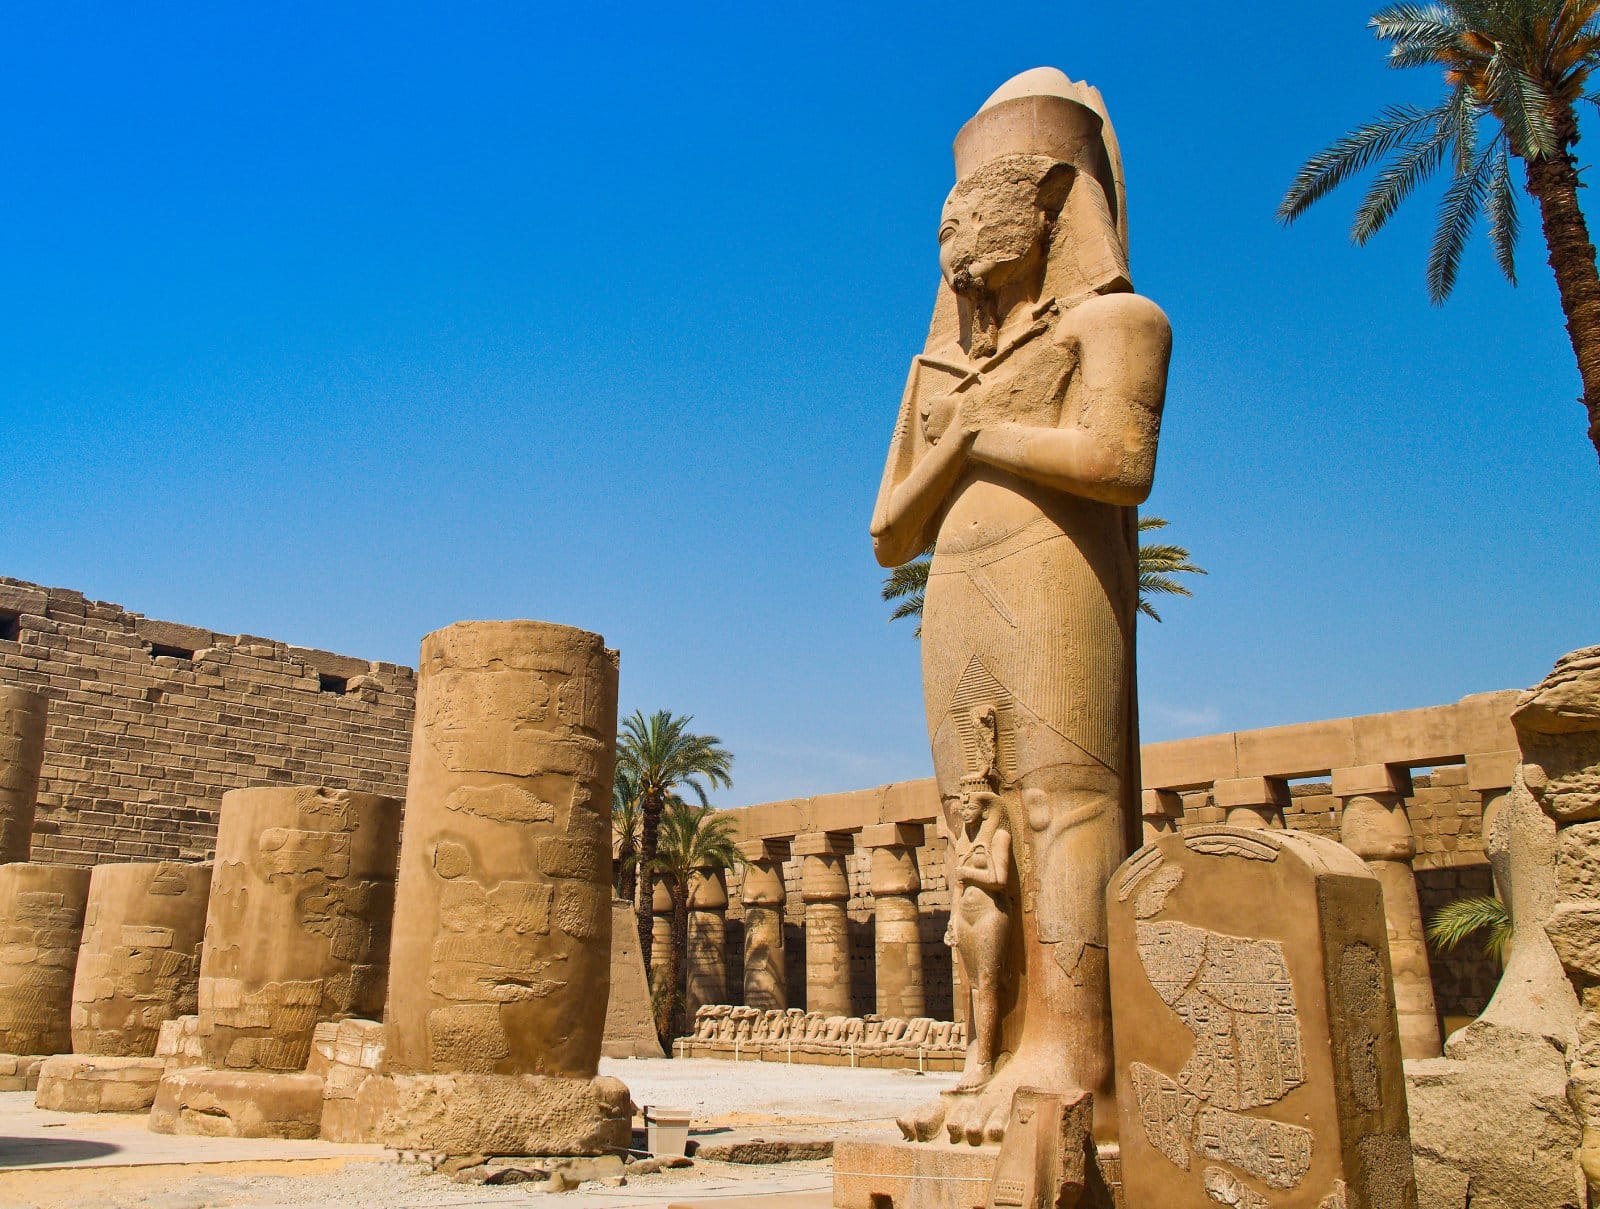 <p class="wp-caption-text">Image Credit: Shutterstock / Lisa-S</p>  <p><span>Luxor, often called the world’s greatest open-air museum, houses Karnak Temple, the largest religious building ever constructed. The nearby Valley of the Kings, with its royal tombs, including that of Tutankhamun, offers a fascinating journey into the beliefs and artistry of the New Kingdom pharaohs.</span></p>